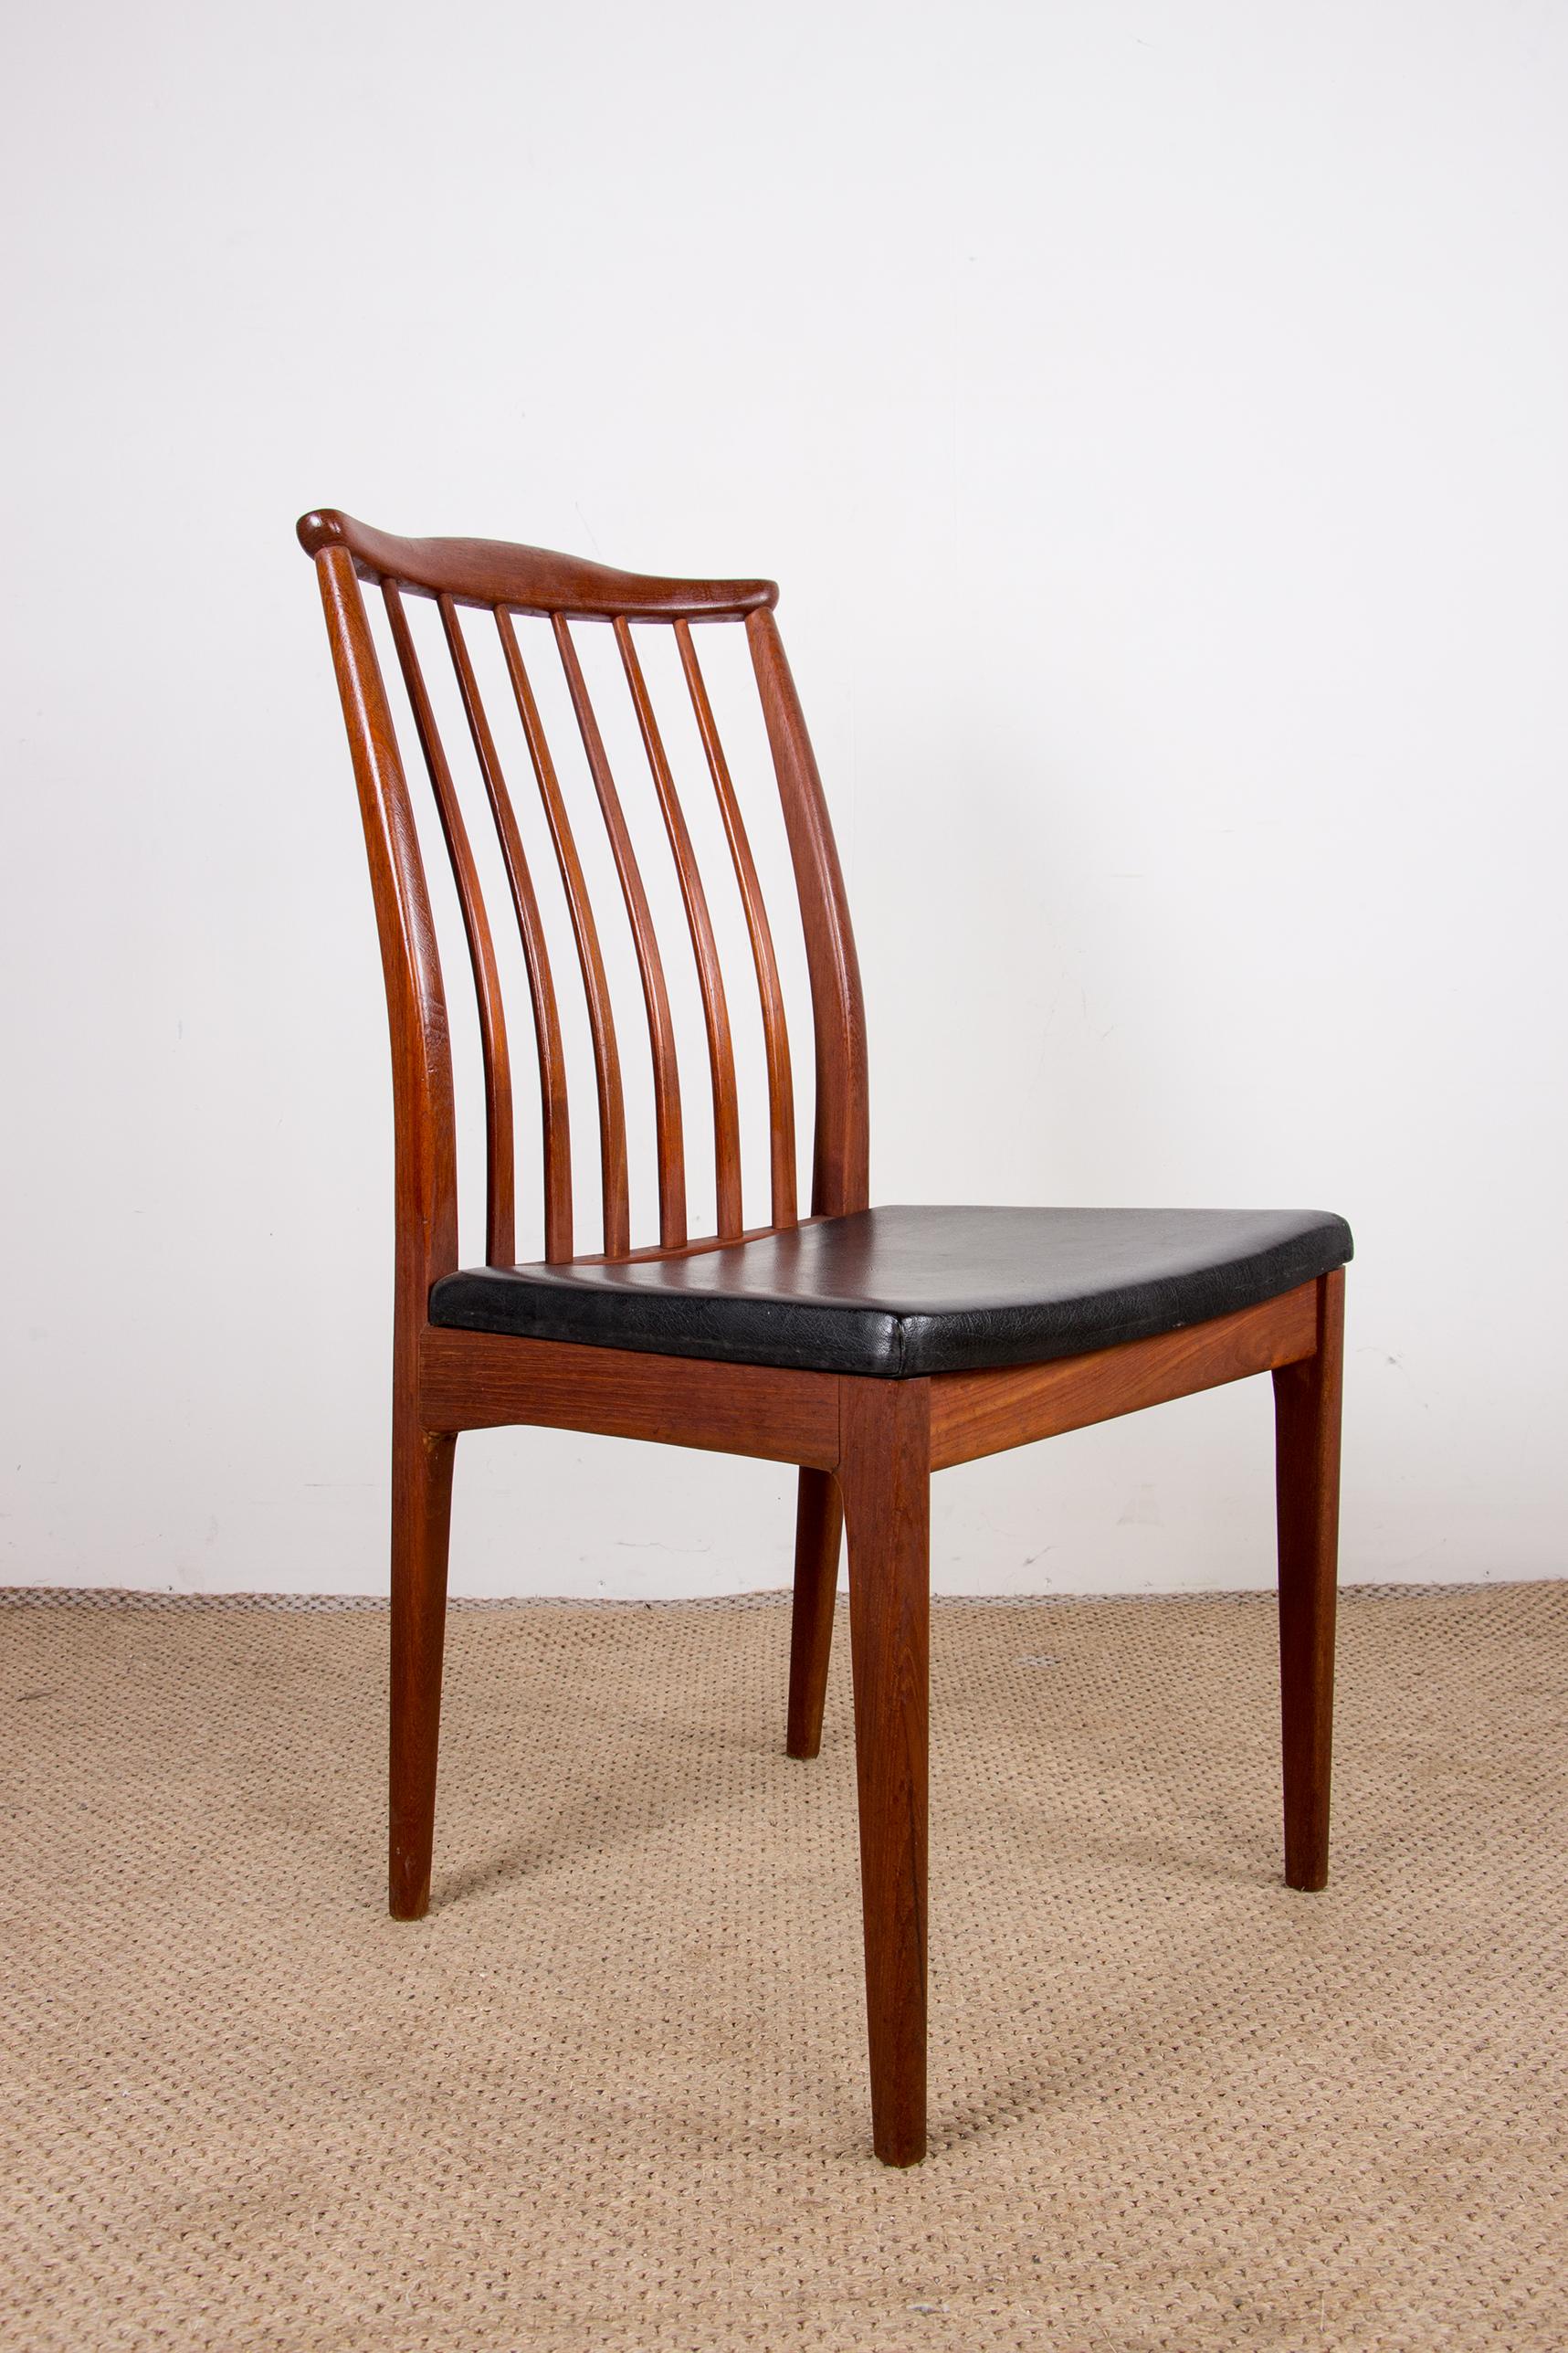 Danish Set of 6 Scandinavian Teak Chairs and Black Leatherette Seats 1960 For Sale